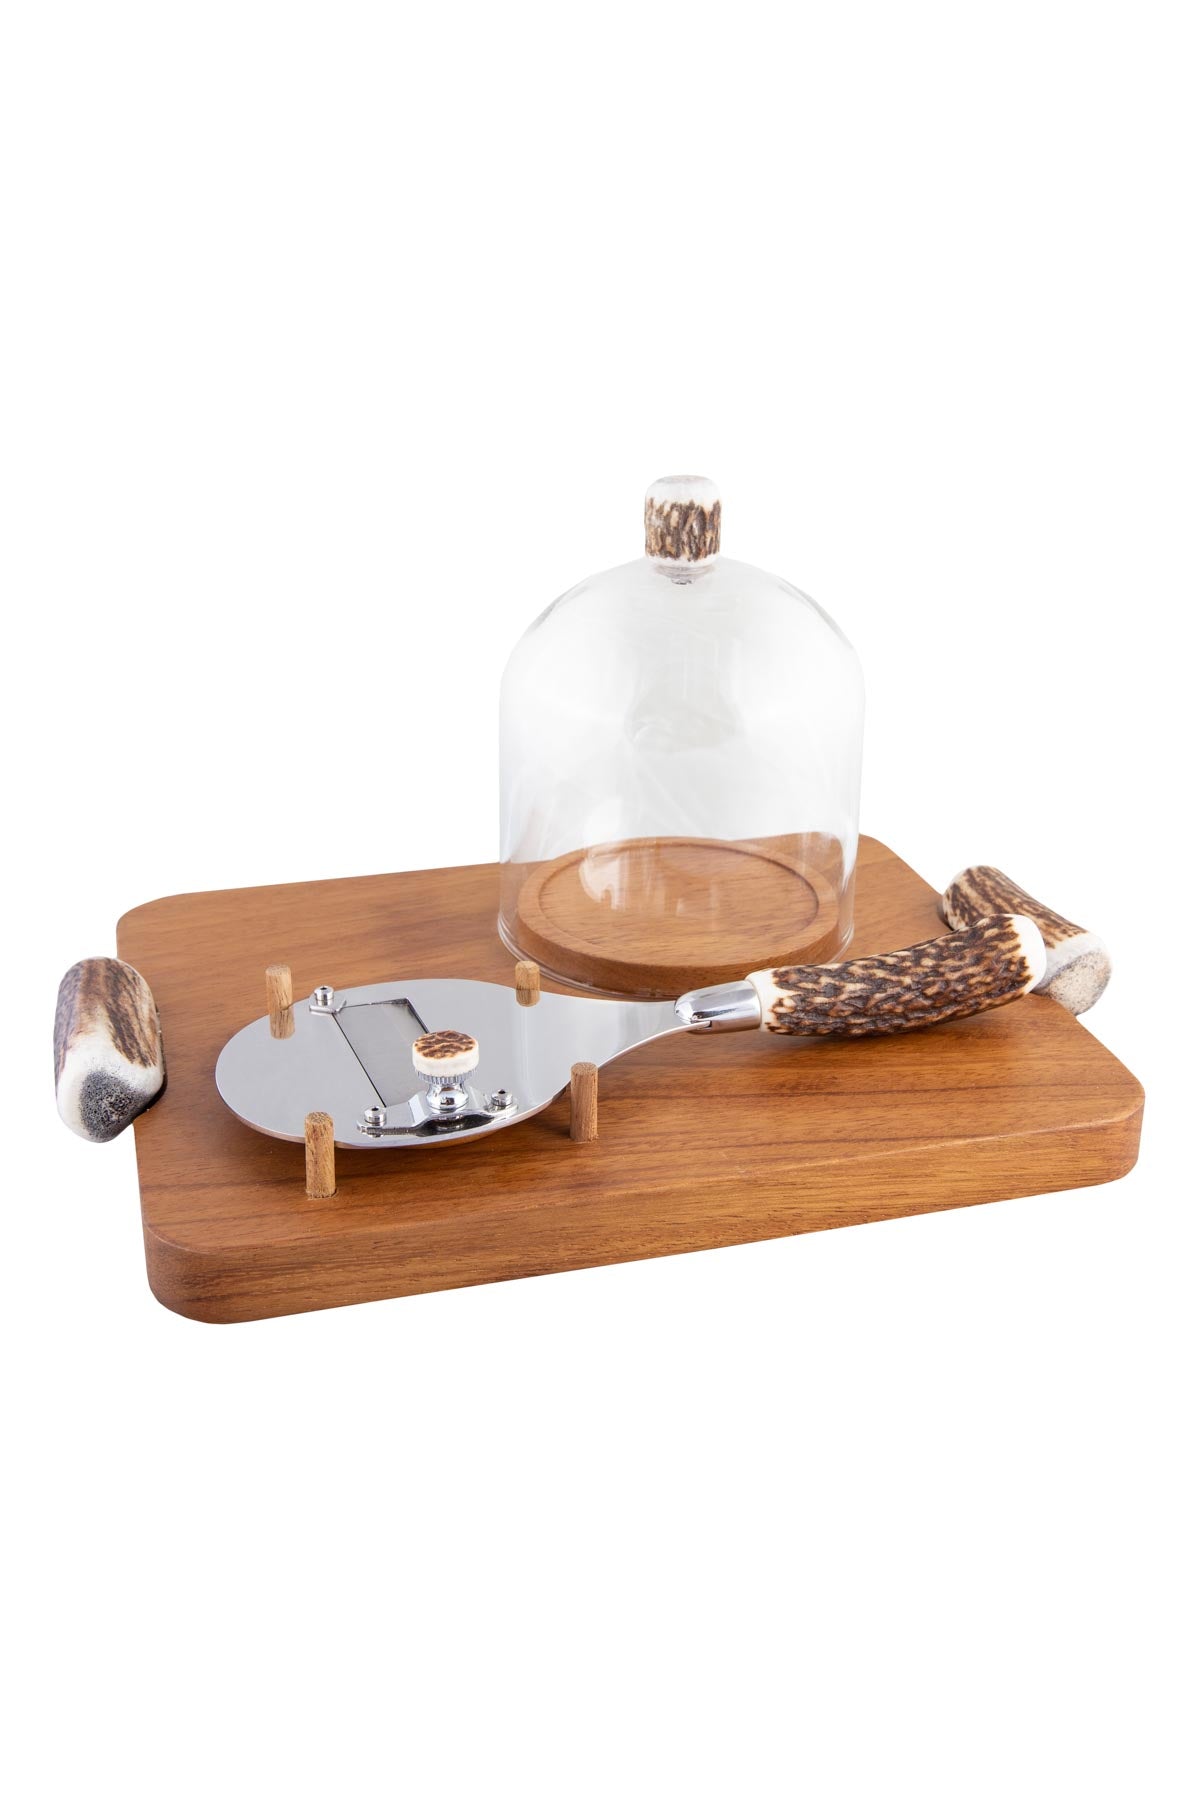 Truffle Set with Glass Dome